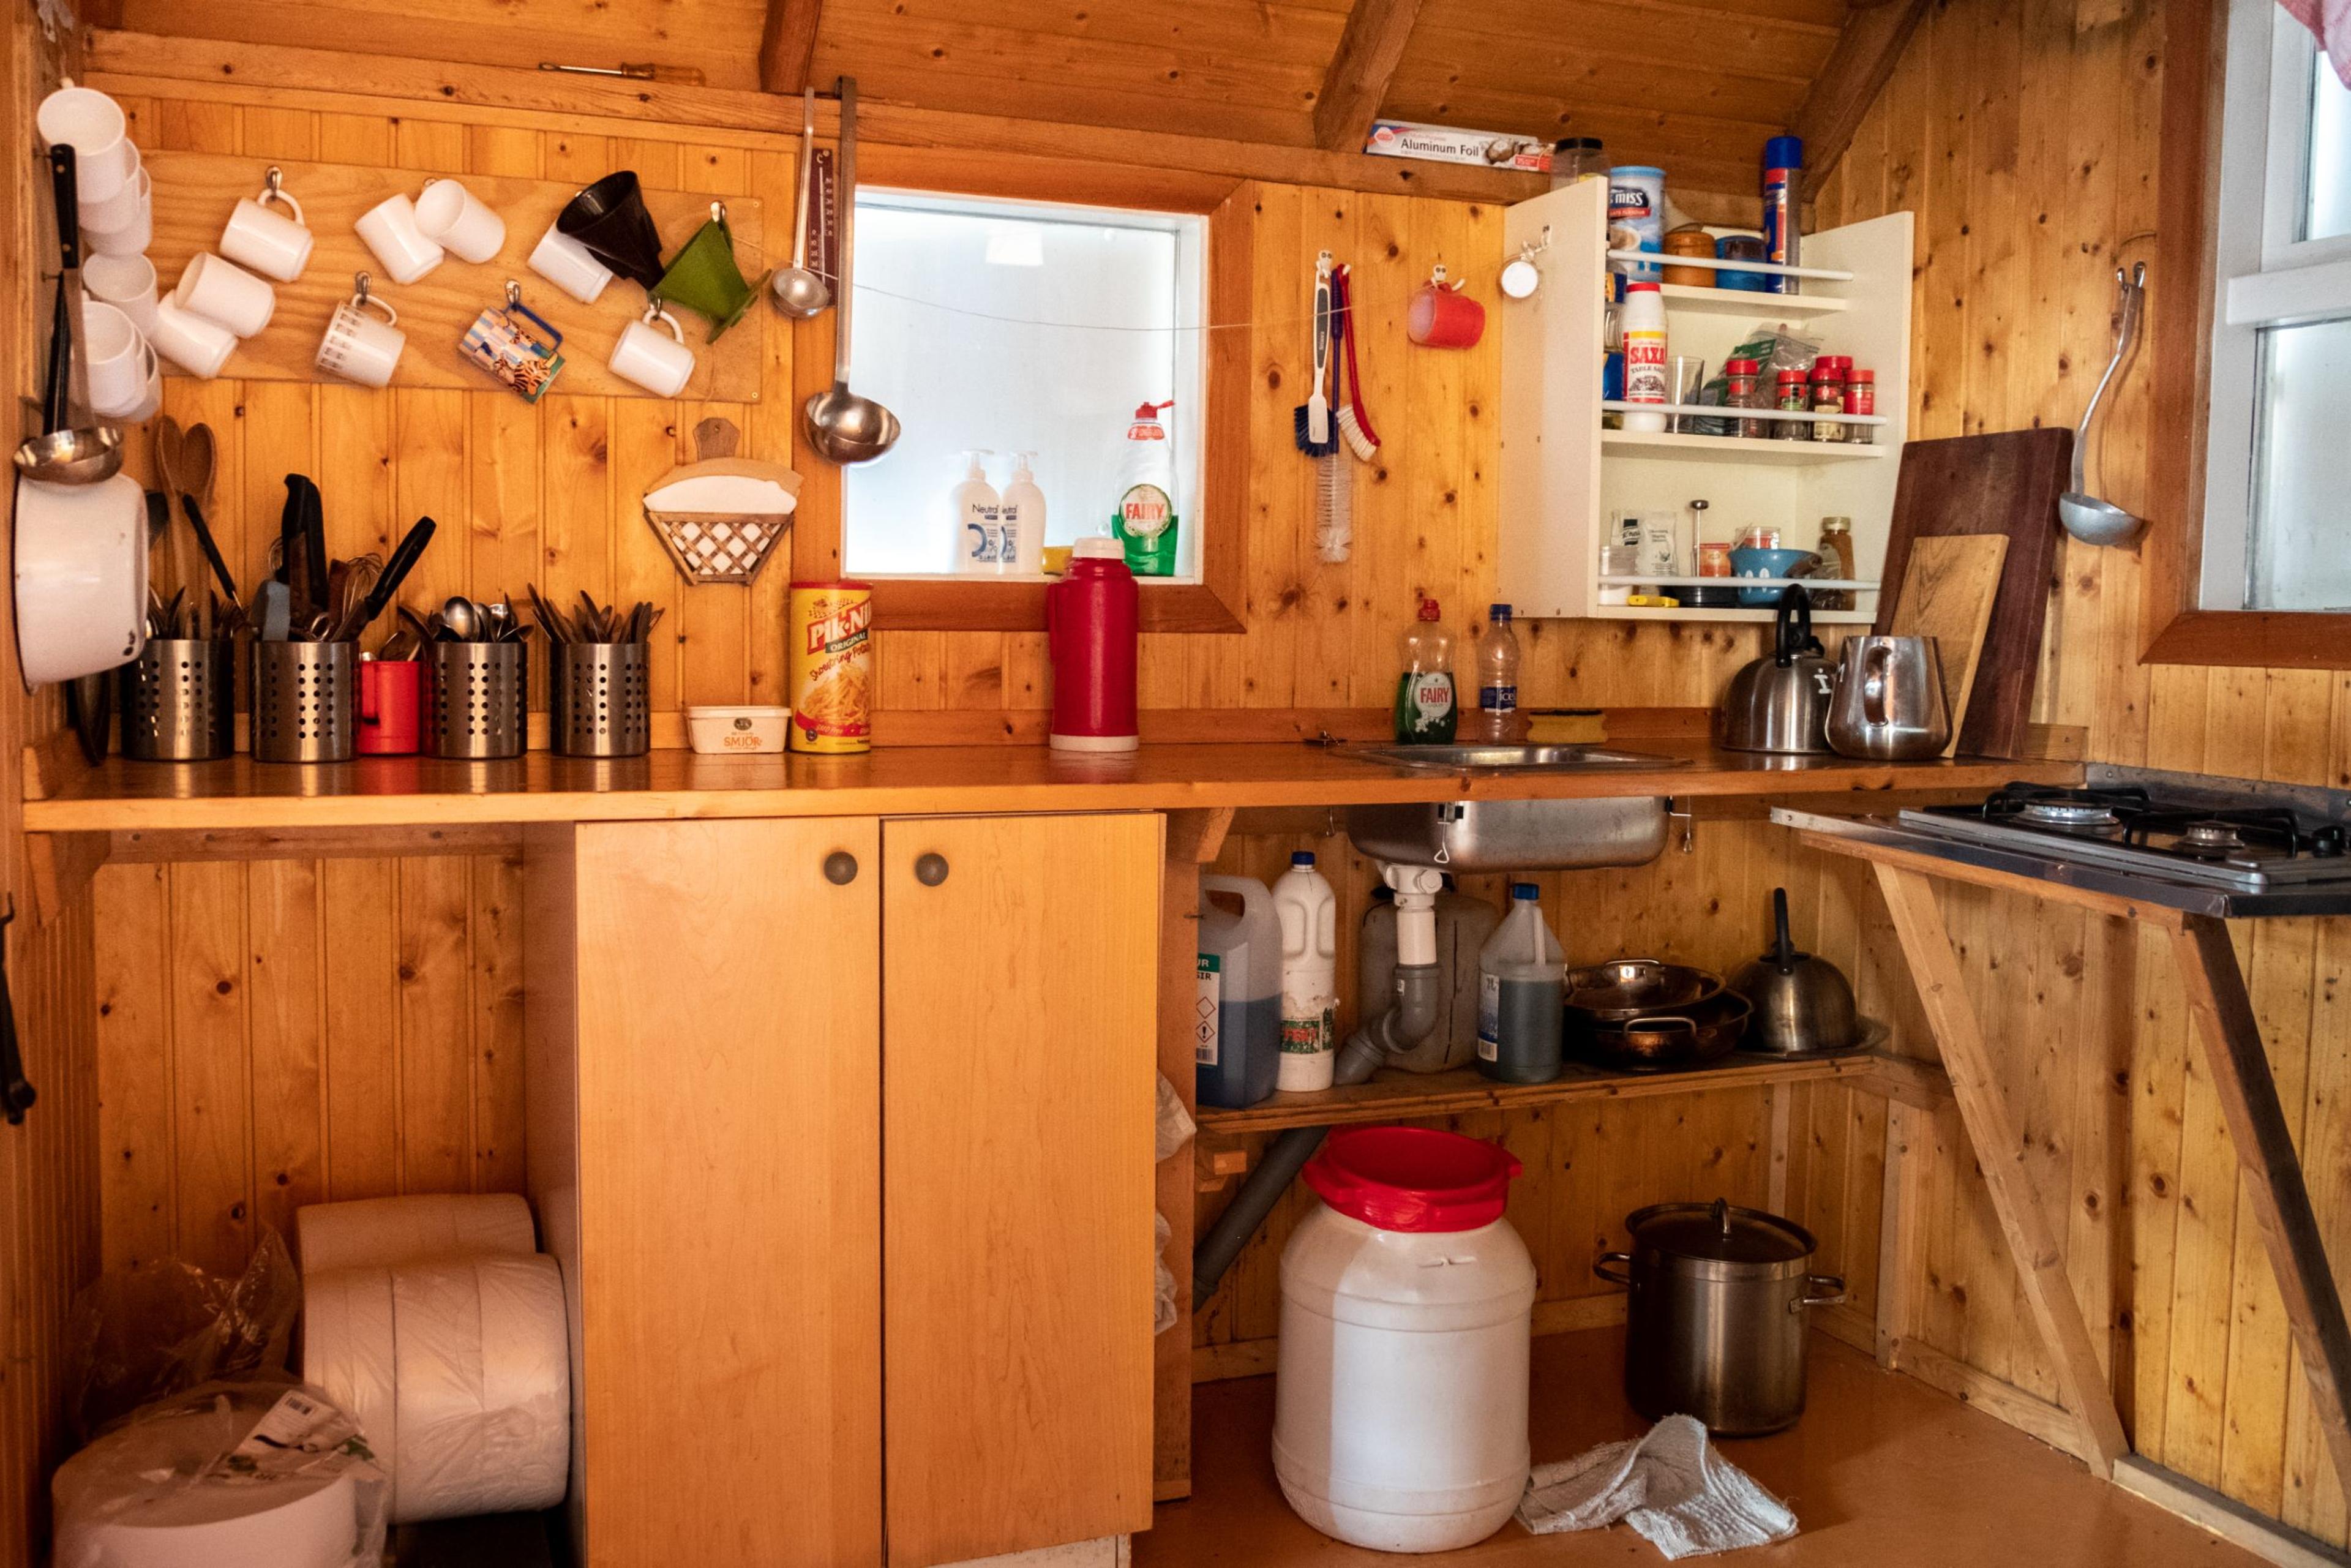 Interior of a wooden hut showcasing a compact kitchen area, complete with utensils and assorted items.